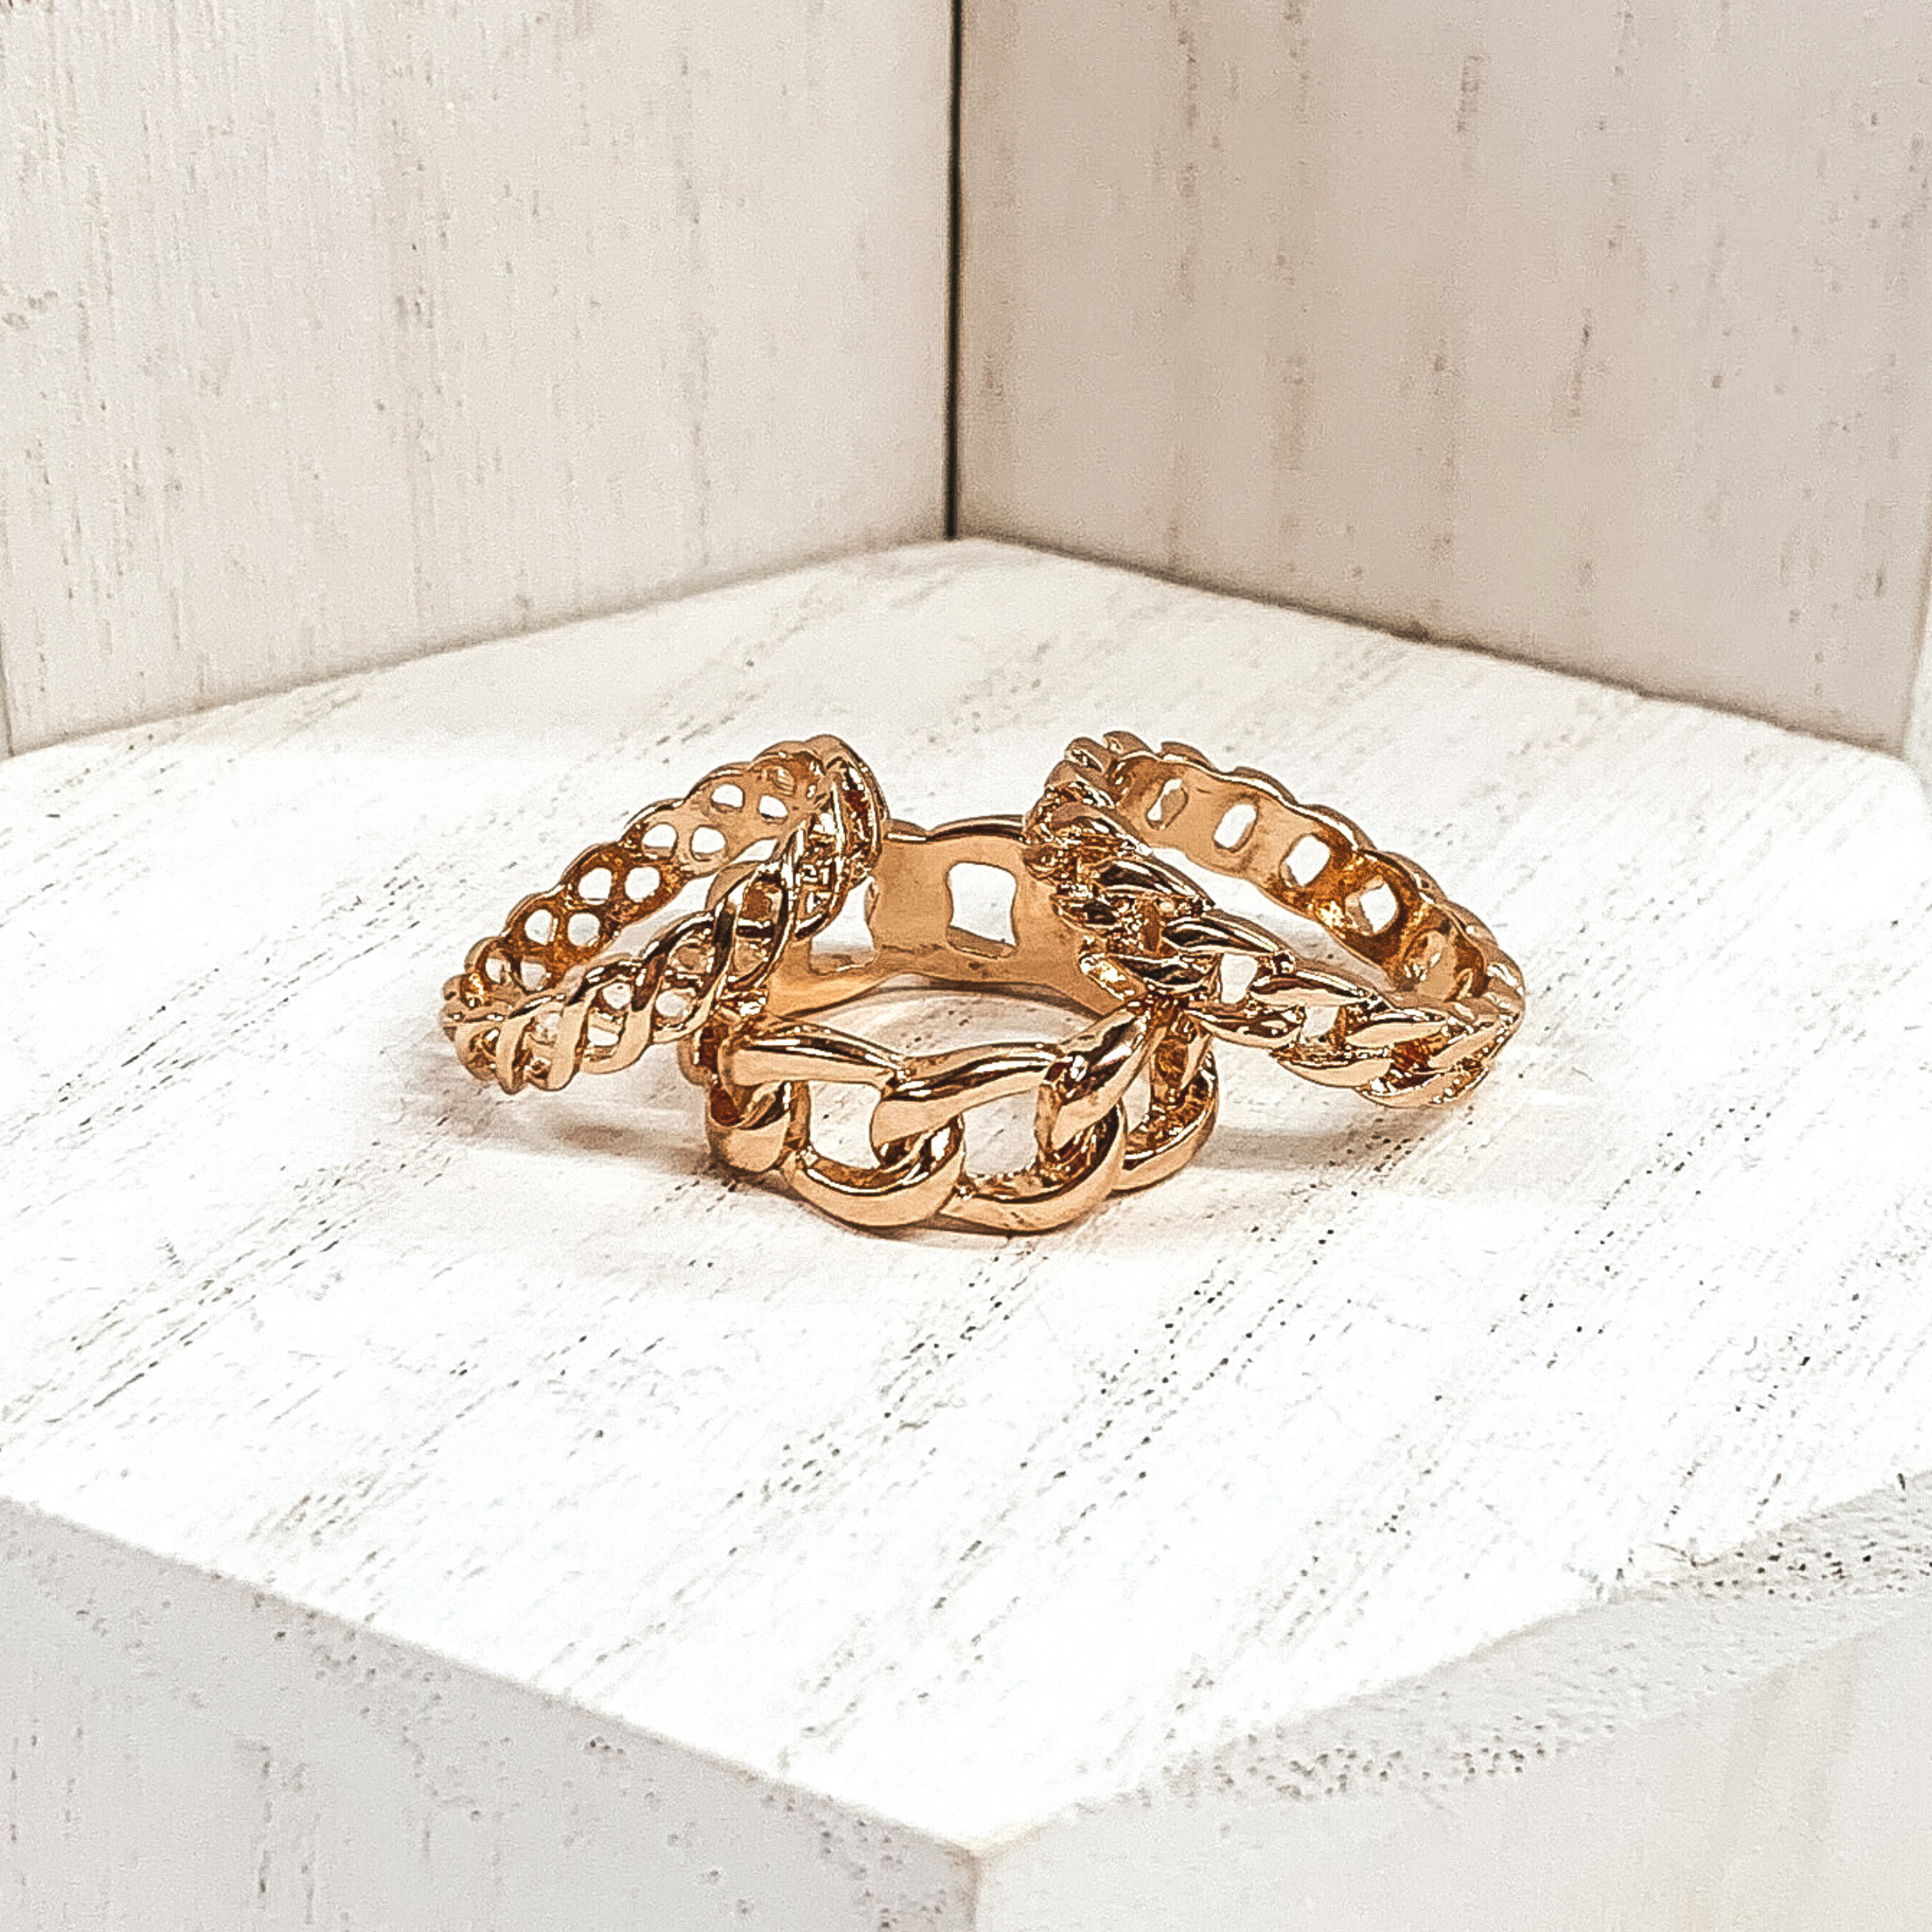 This set of gold rings include three different band widths and different types of chains for each ring. These rings are pictured on a white background.